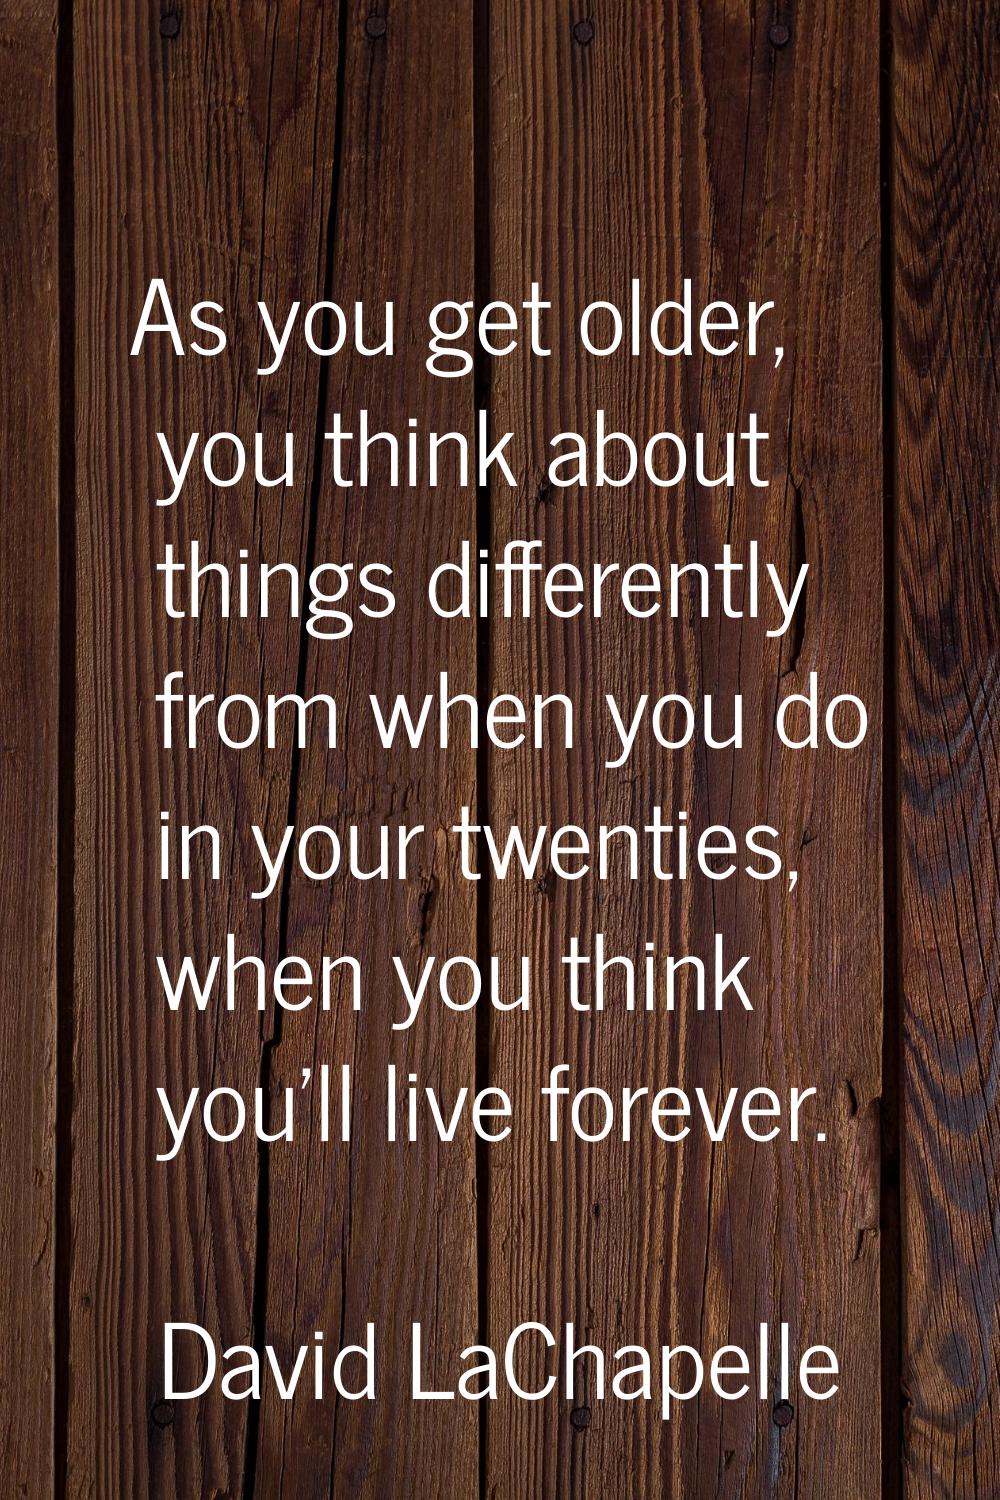 As you get older, you think about things differently from when you do in your twenties, when you th